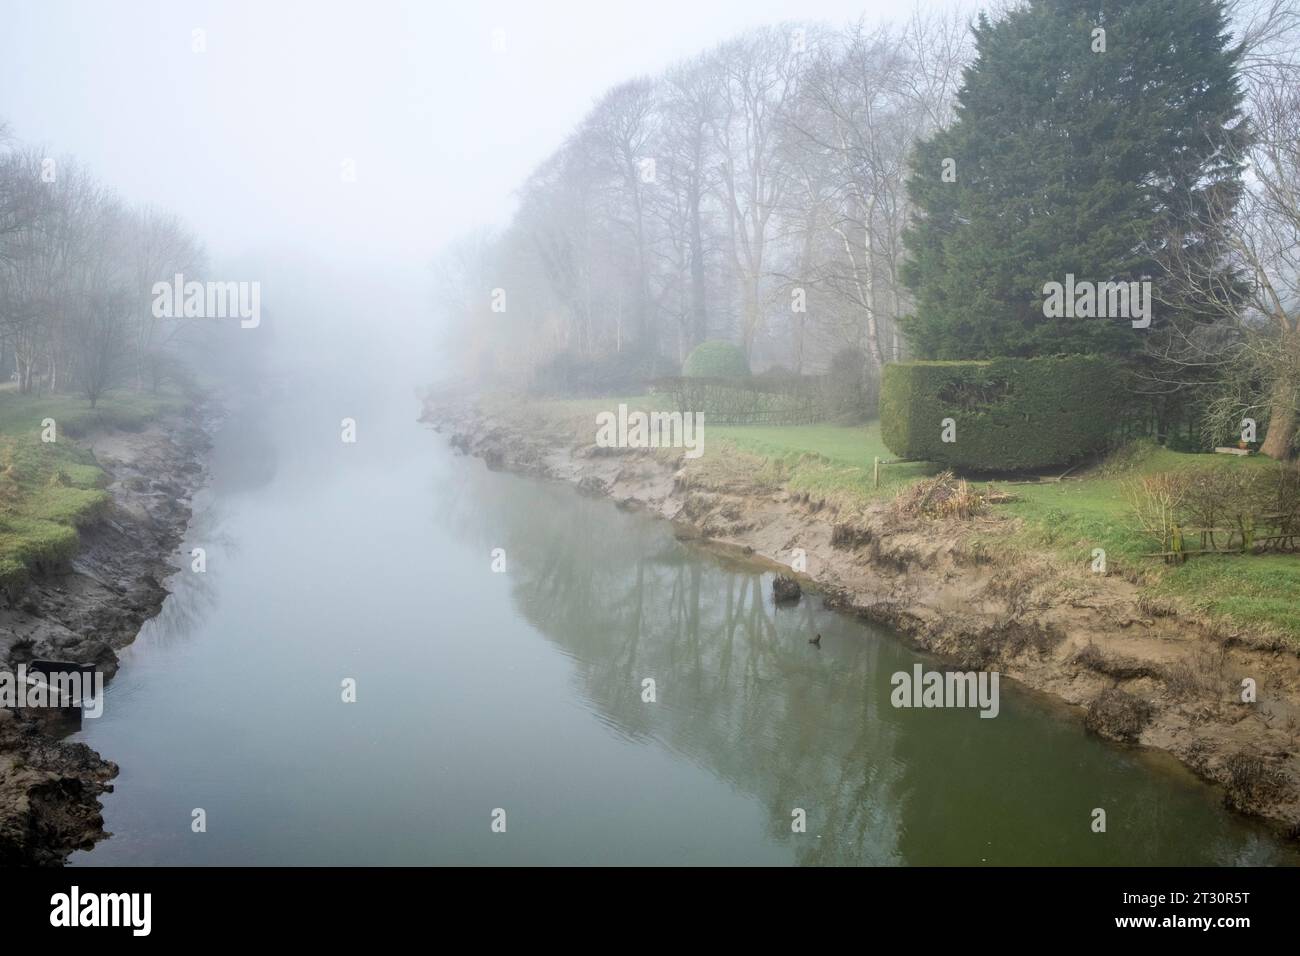 The River Ouse On A Misty Day, Lewes, East Sussex, UK. Stock Photo